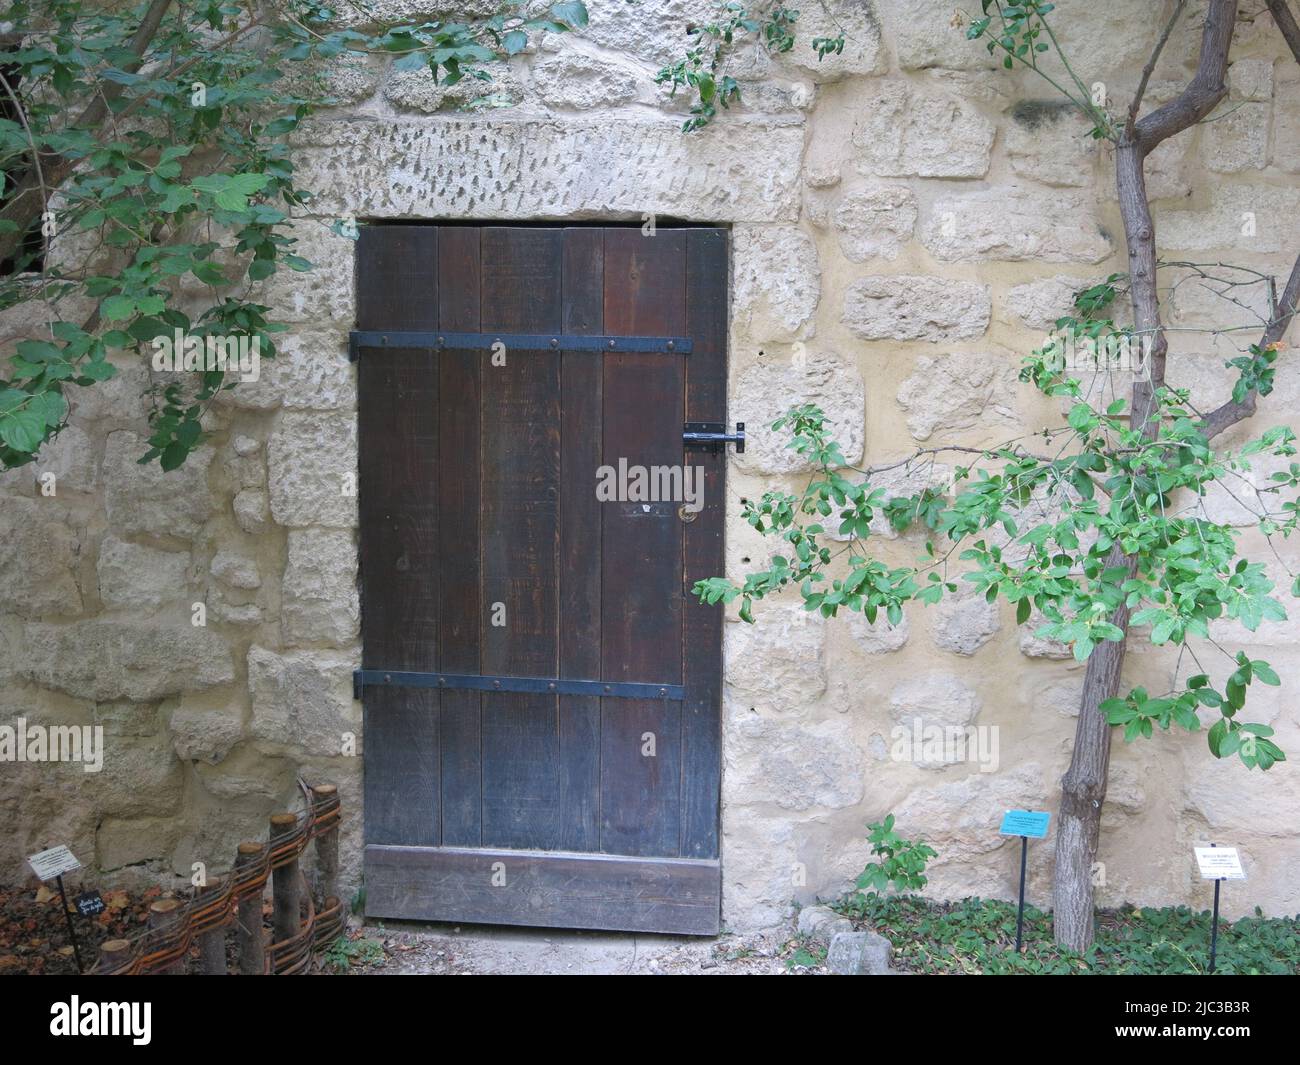 An old wooden doorway in a stone wall - leading to a secret garden?  The Jardin Medieval at Uzes in France, set in the grounds of Raynon Castle. Stock Photo